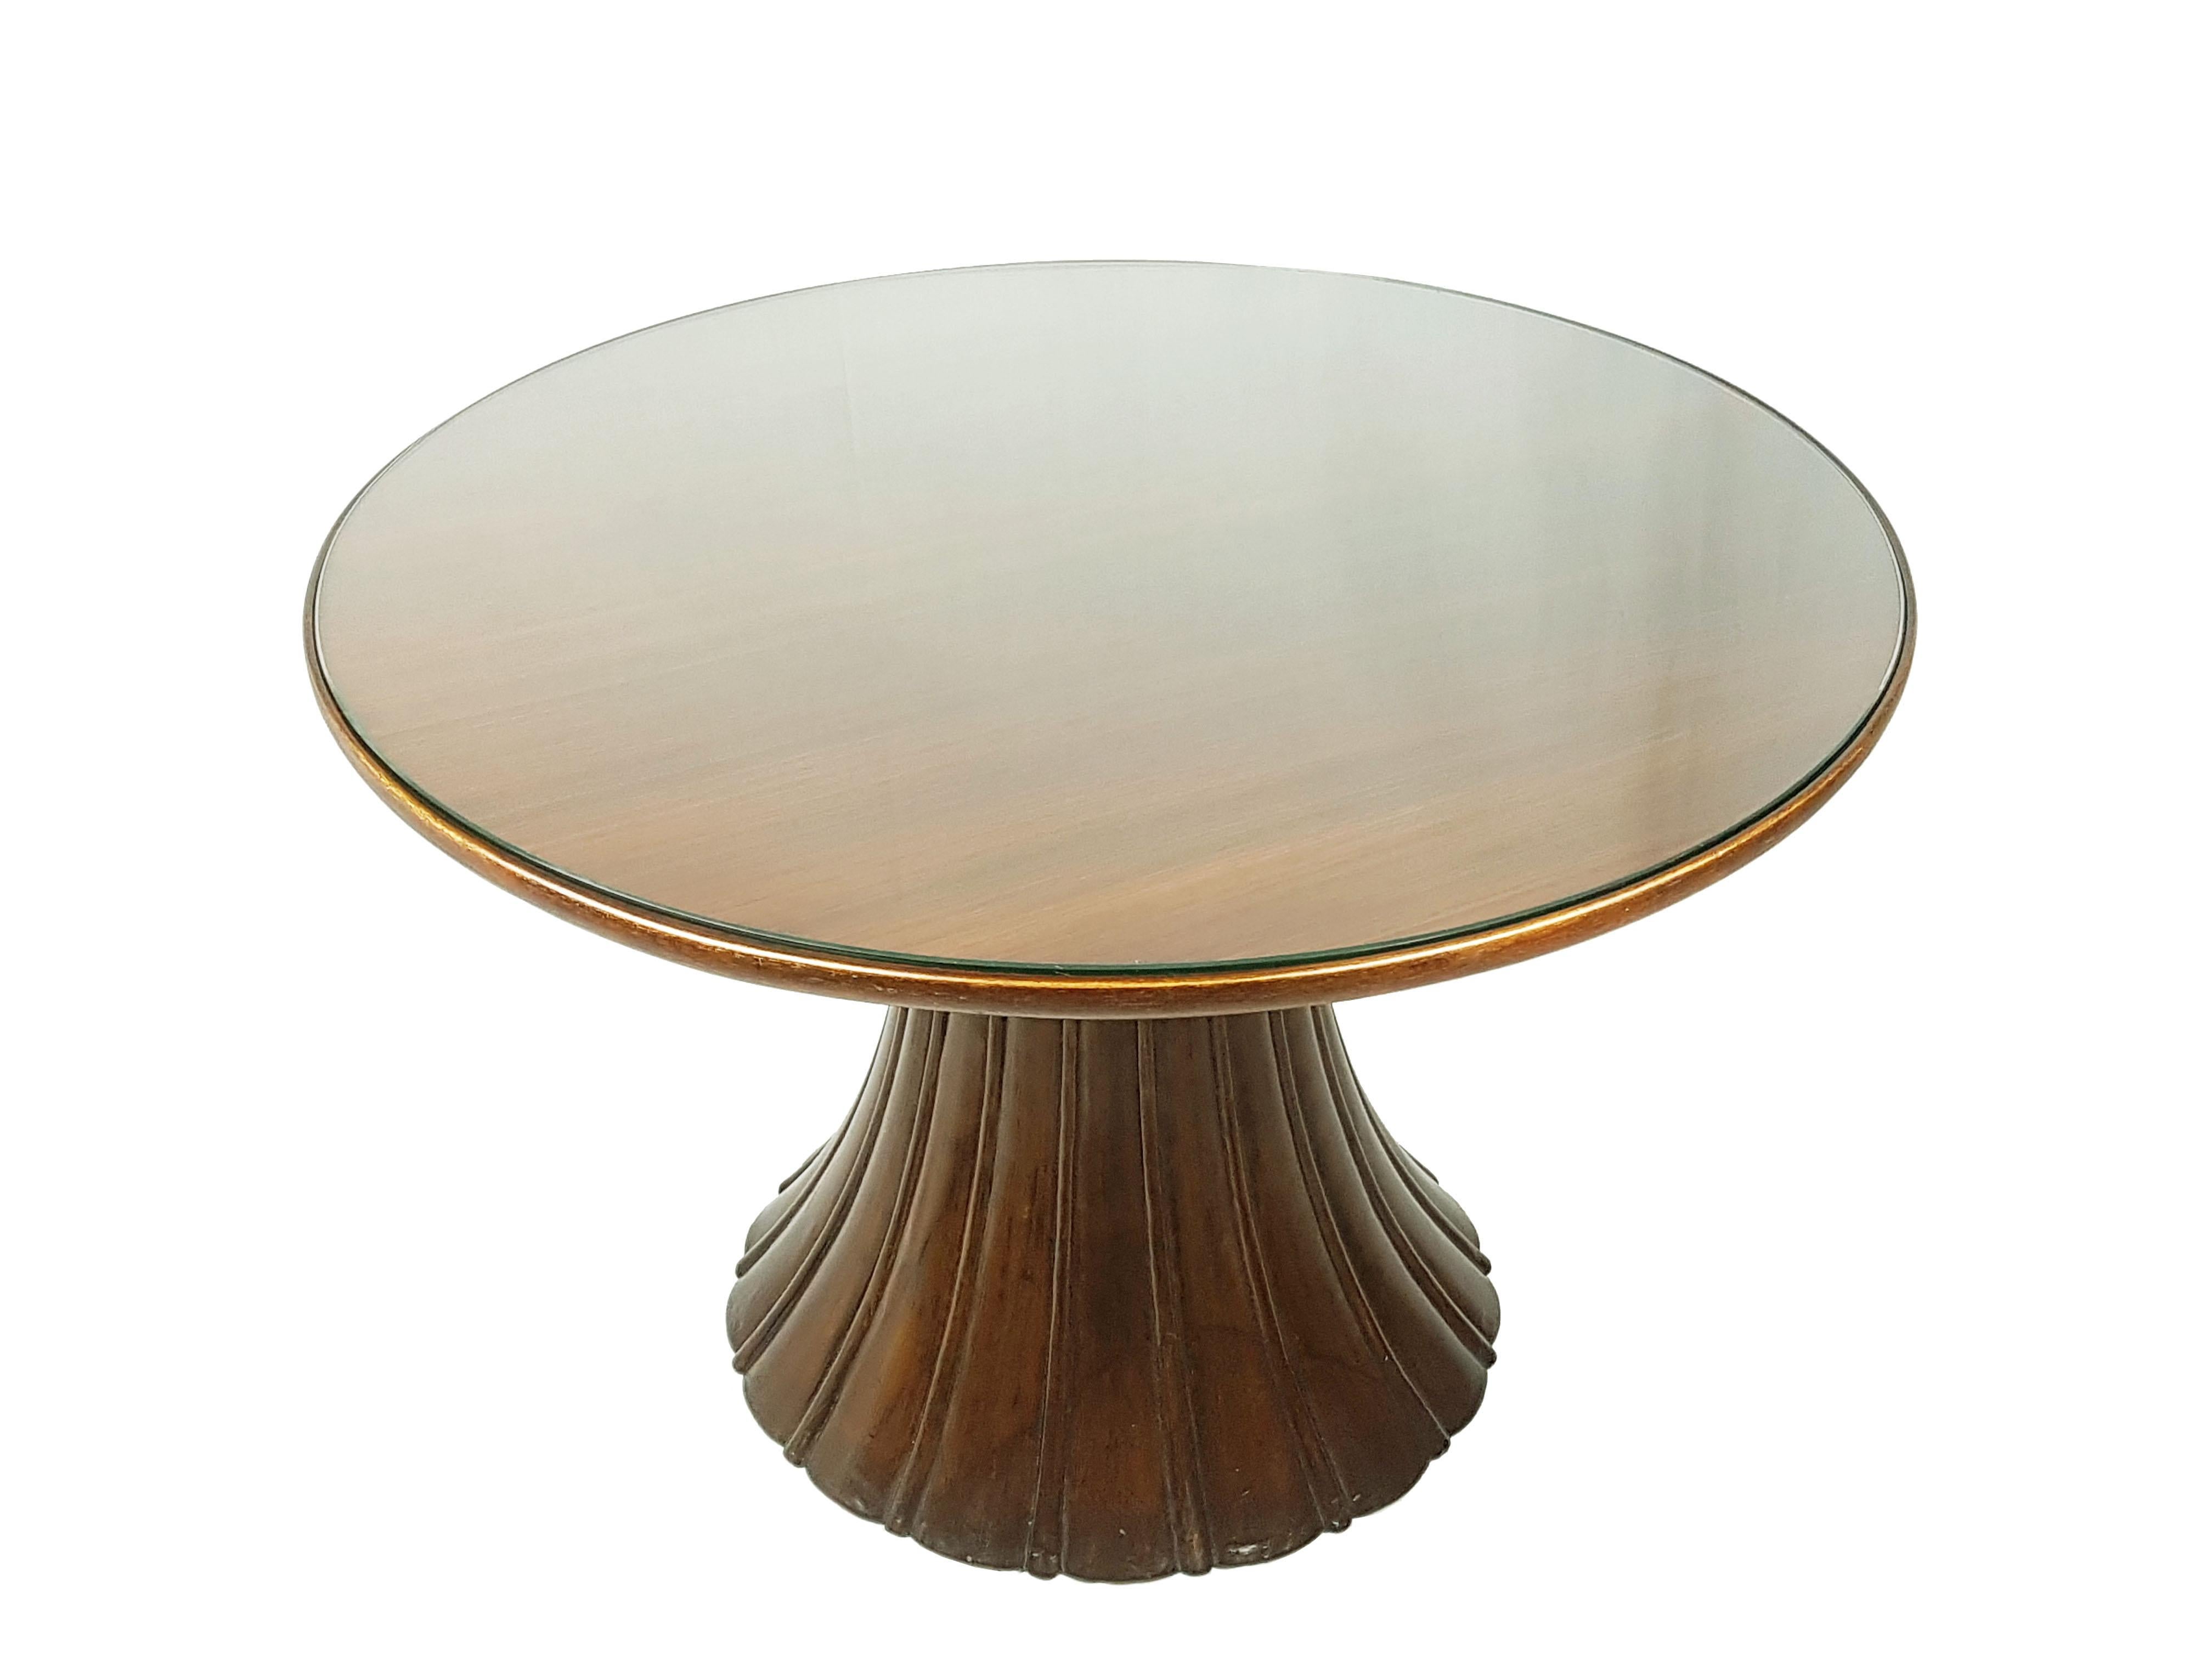 Fine and rare coffee table attributed to Guglielmo Ulrich. This beautiful table was manufactured in Italy around the 1940s in solid wood, stained and polished with a round glass table top. the structure of the base is massive and sculptural and